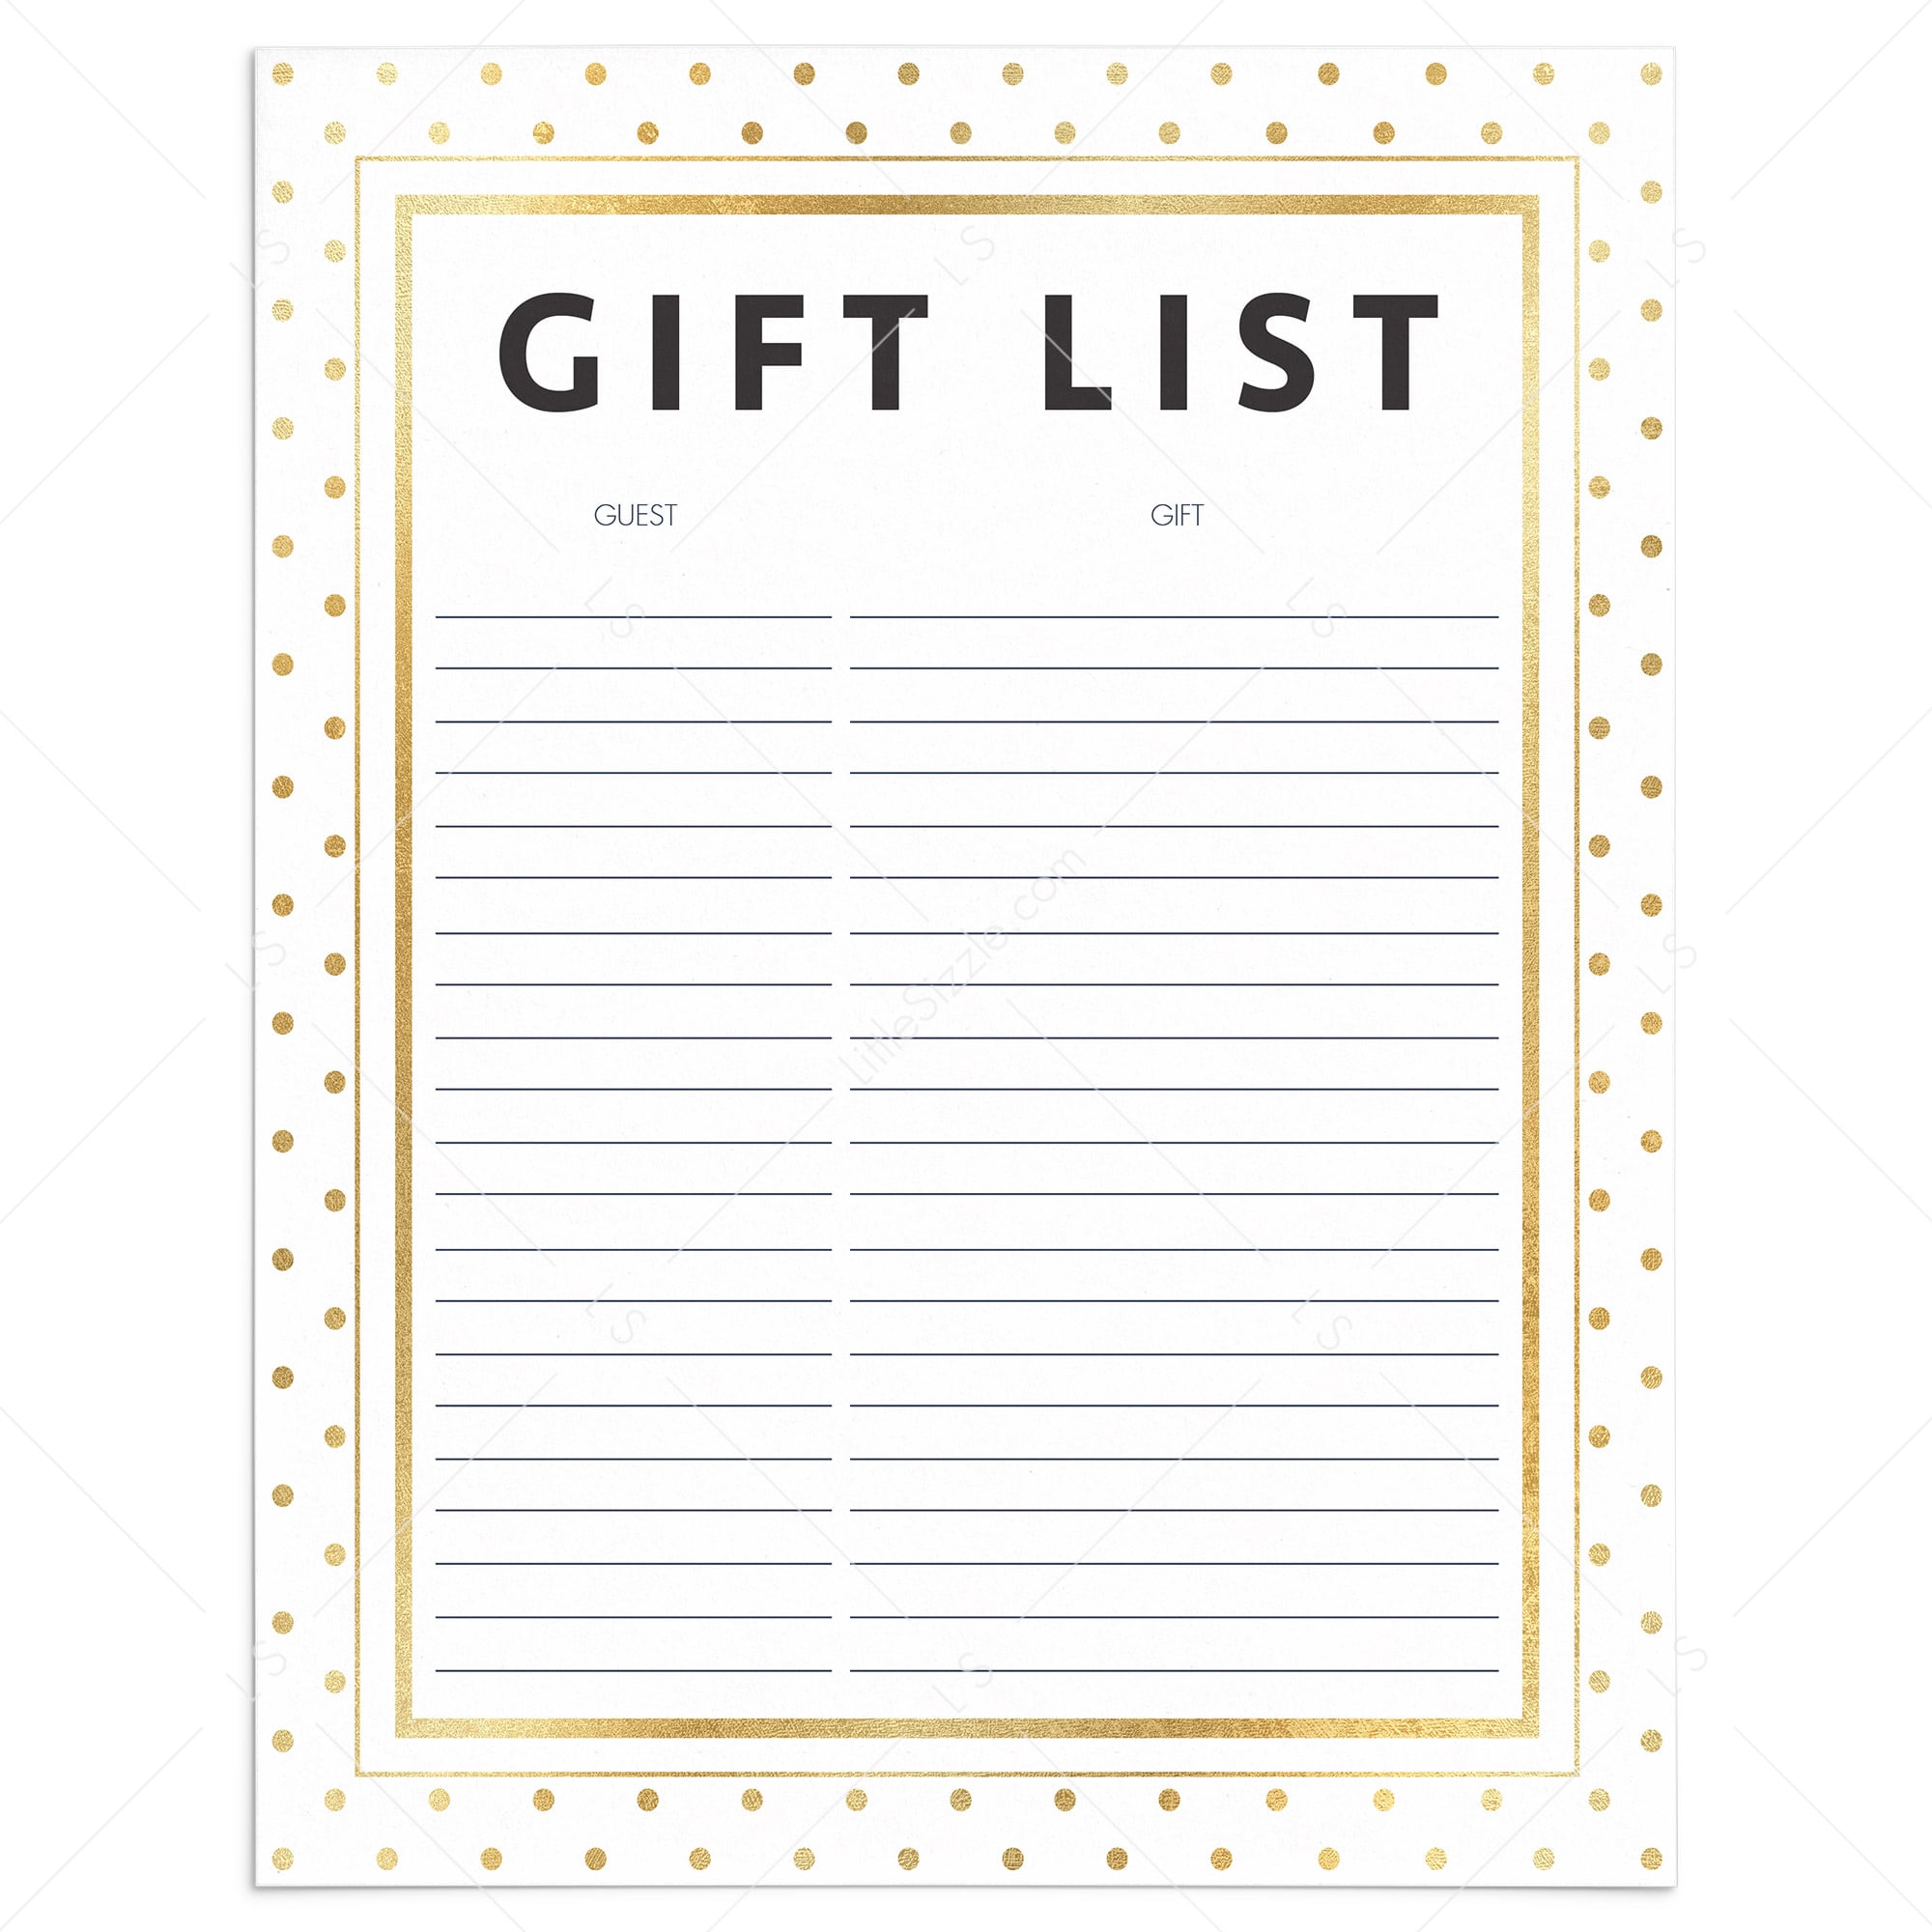 Printable gift list with gold polka dots by LittleSizzle